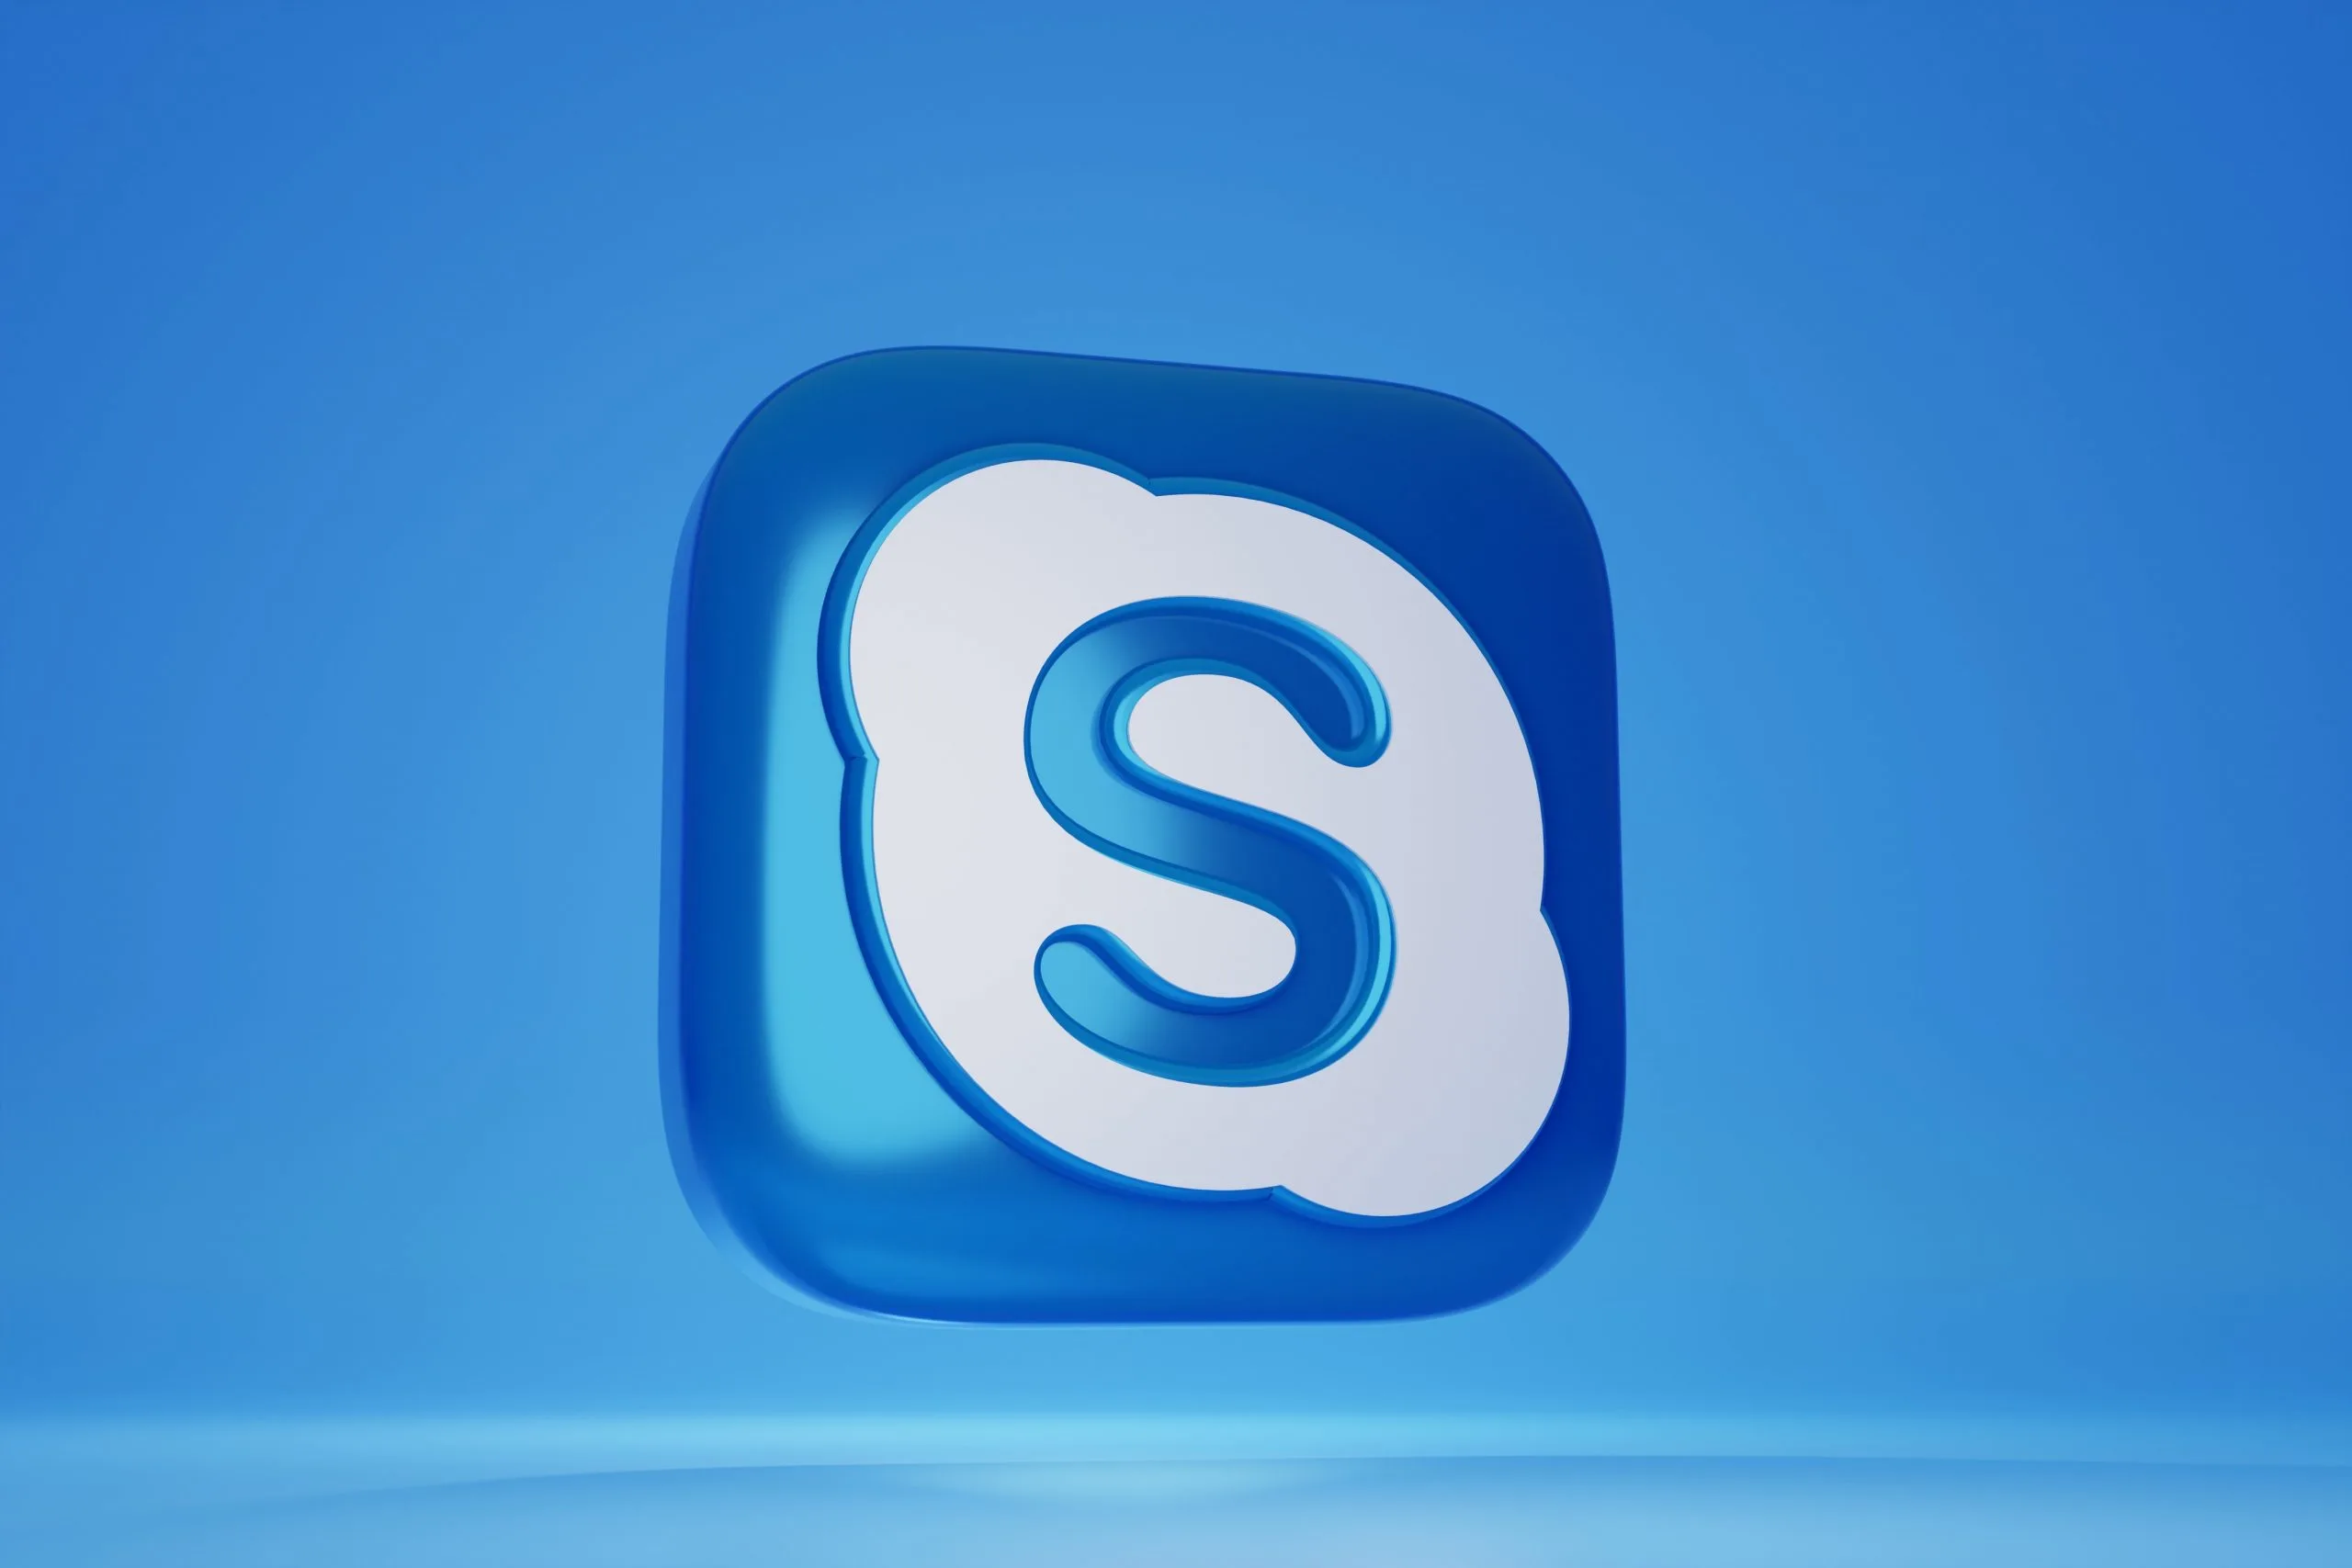 Does Skype Tell You When Someone Is Recording?